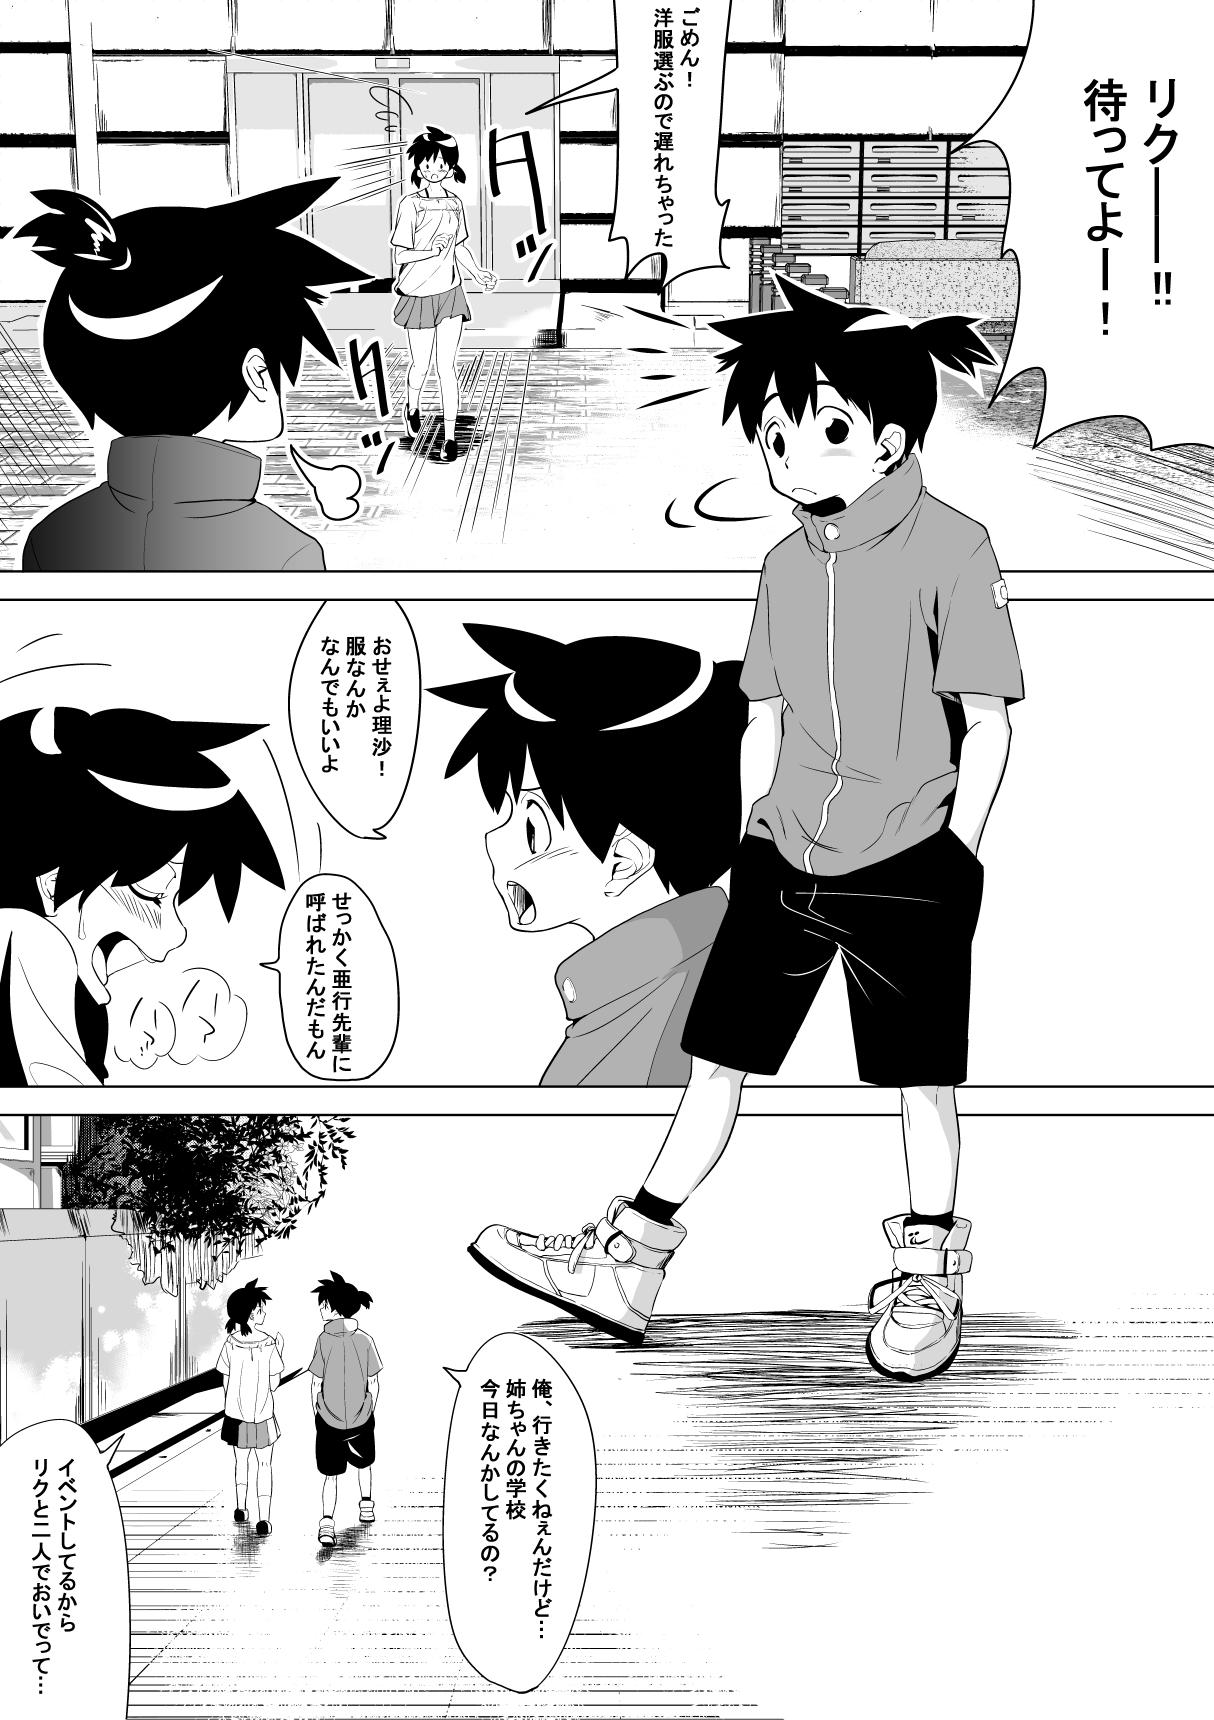 Sexteen こんな国は嫌だ Mexican - Page 6